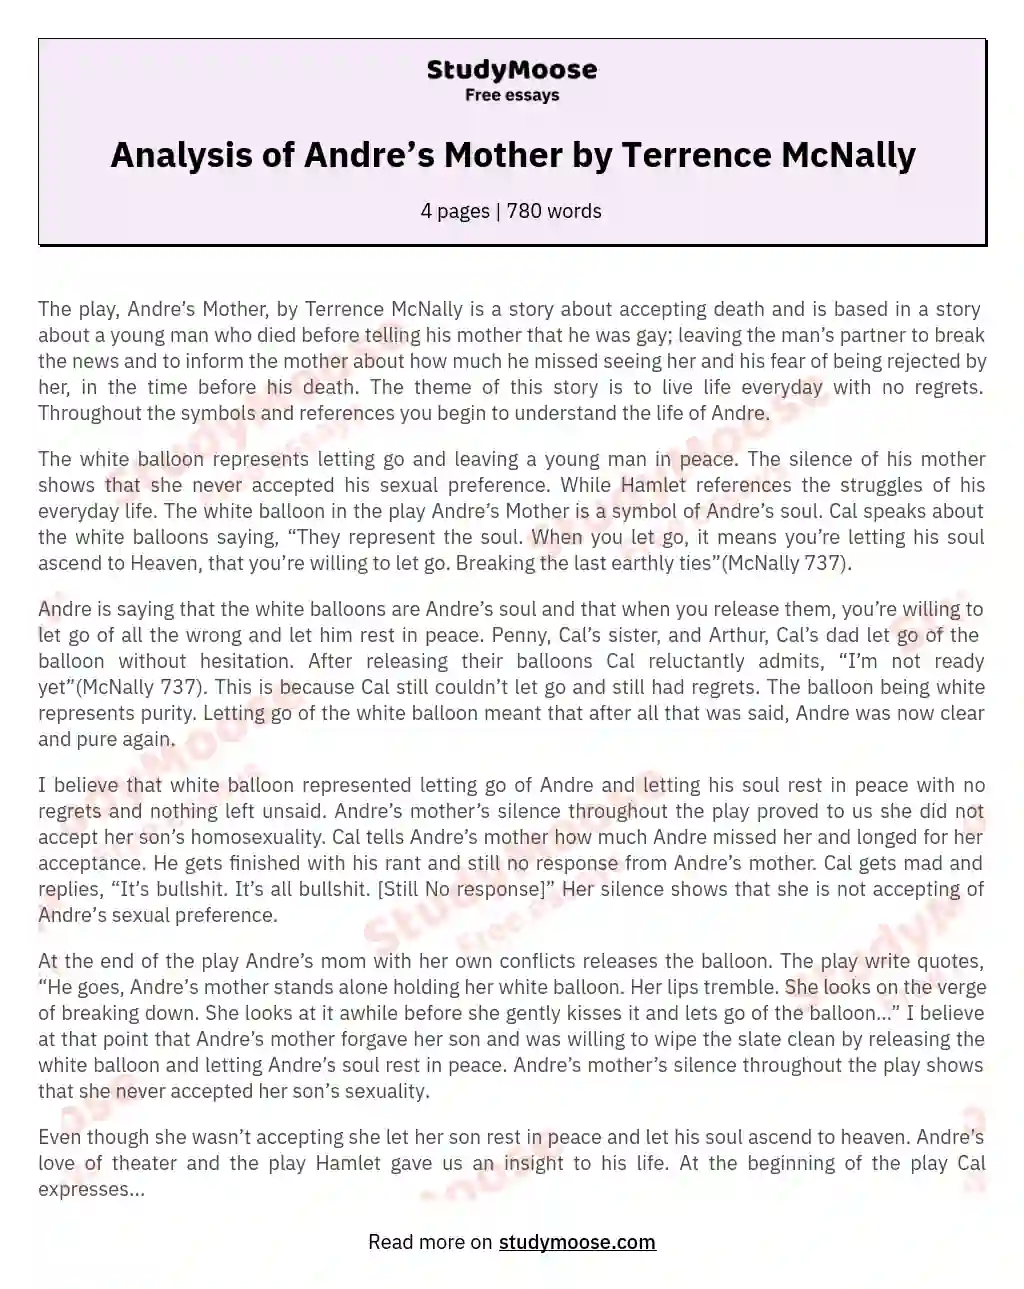 Analysis of Andre’s Mother by Terrence McNally essay